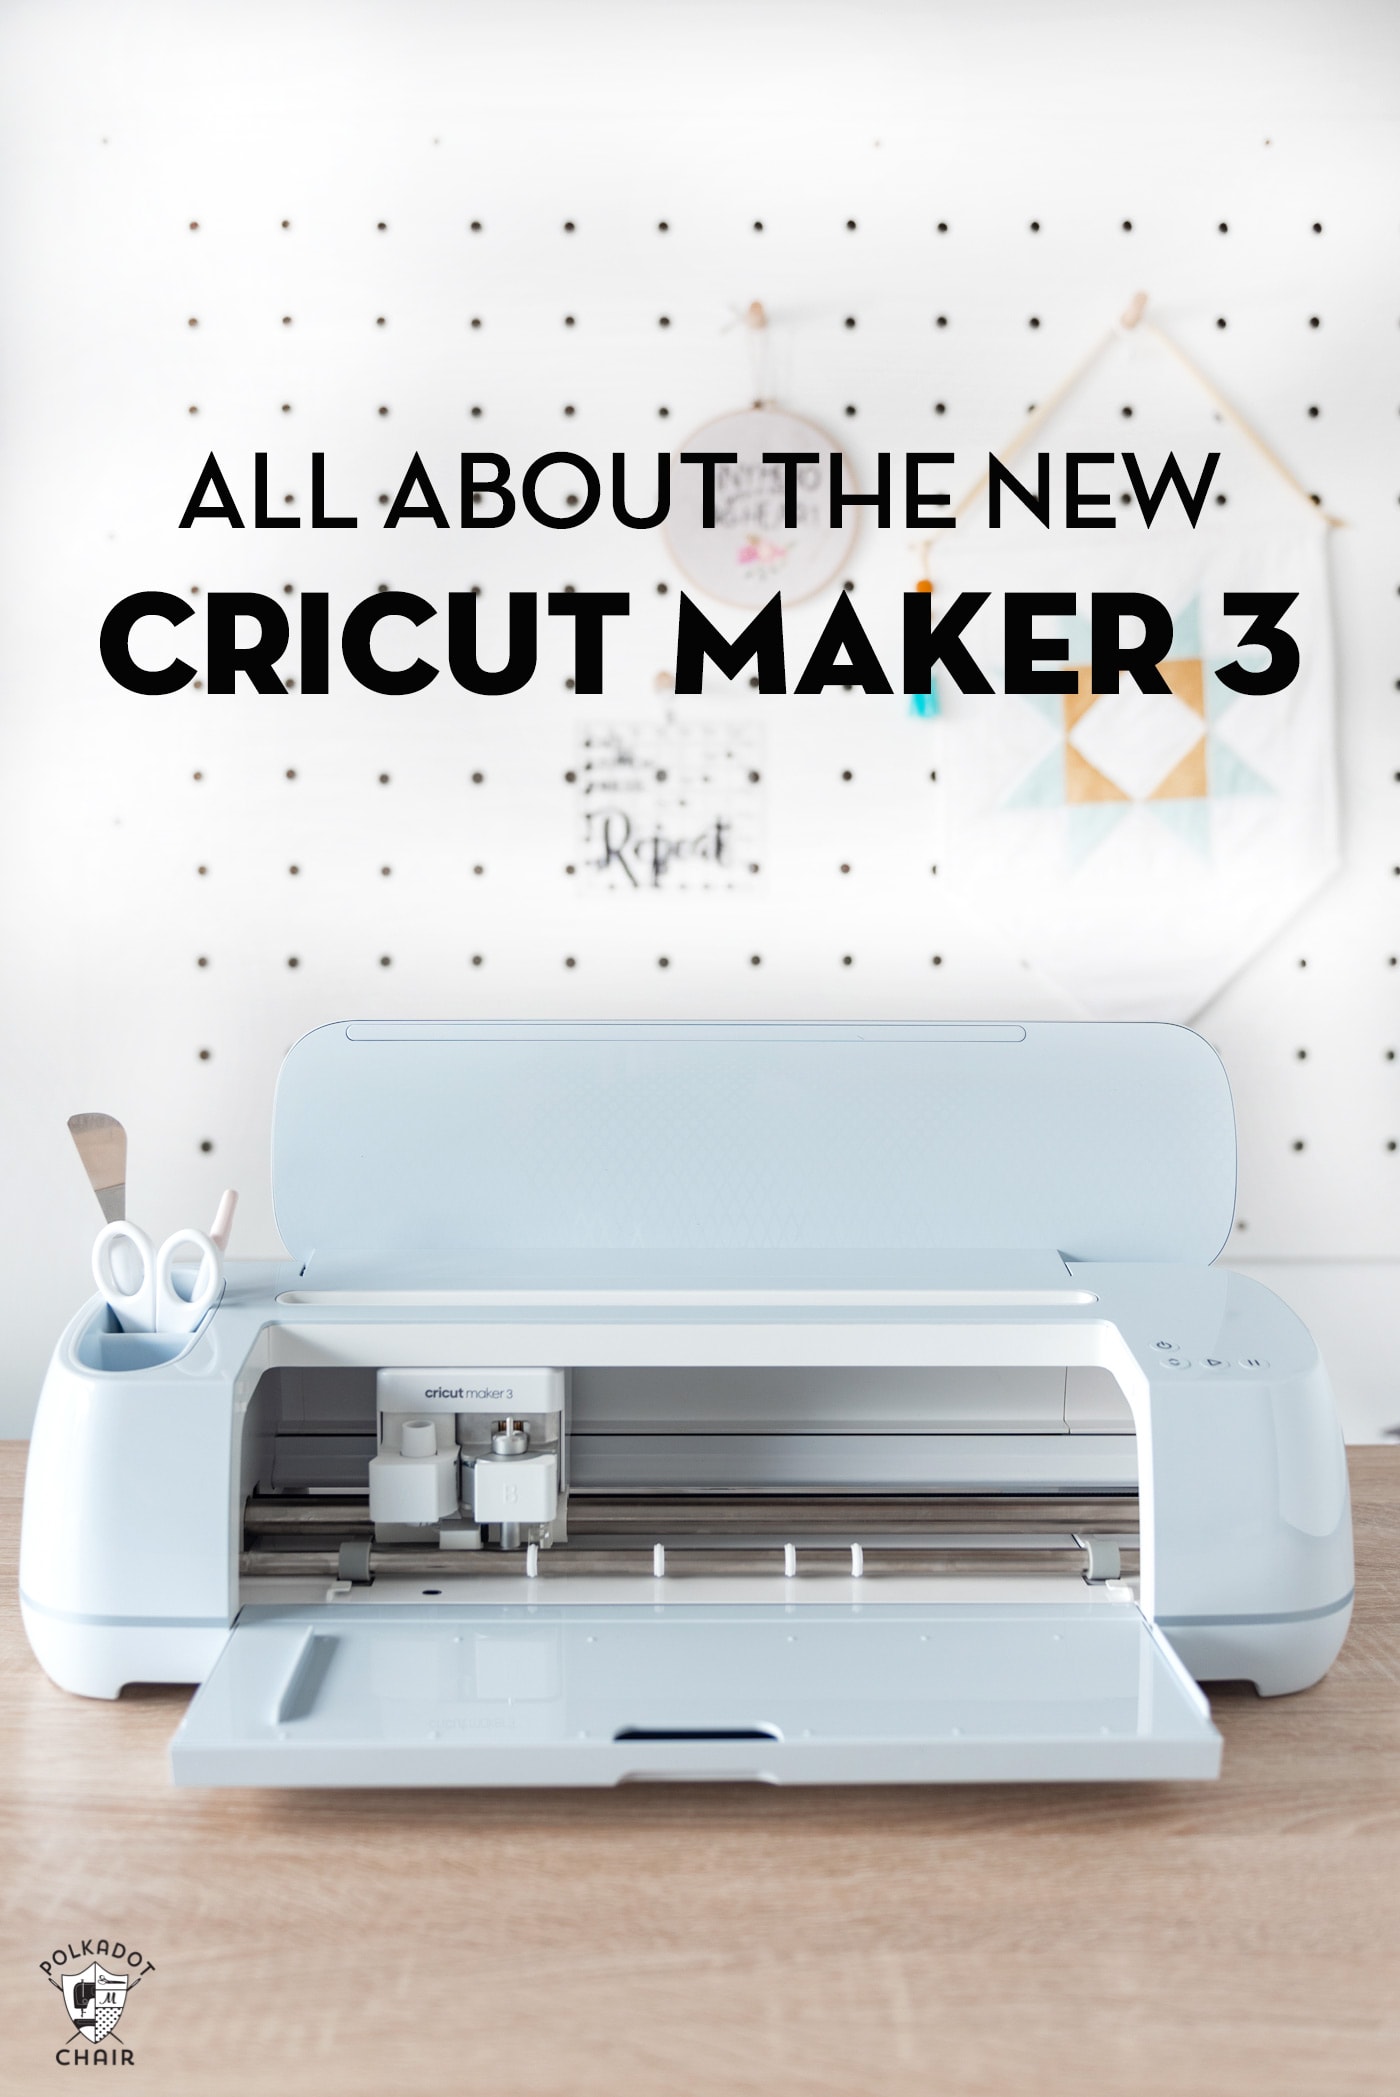 All About the NEW Cricut Maker 3 Machine with Review Polka Dot Chair